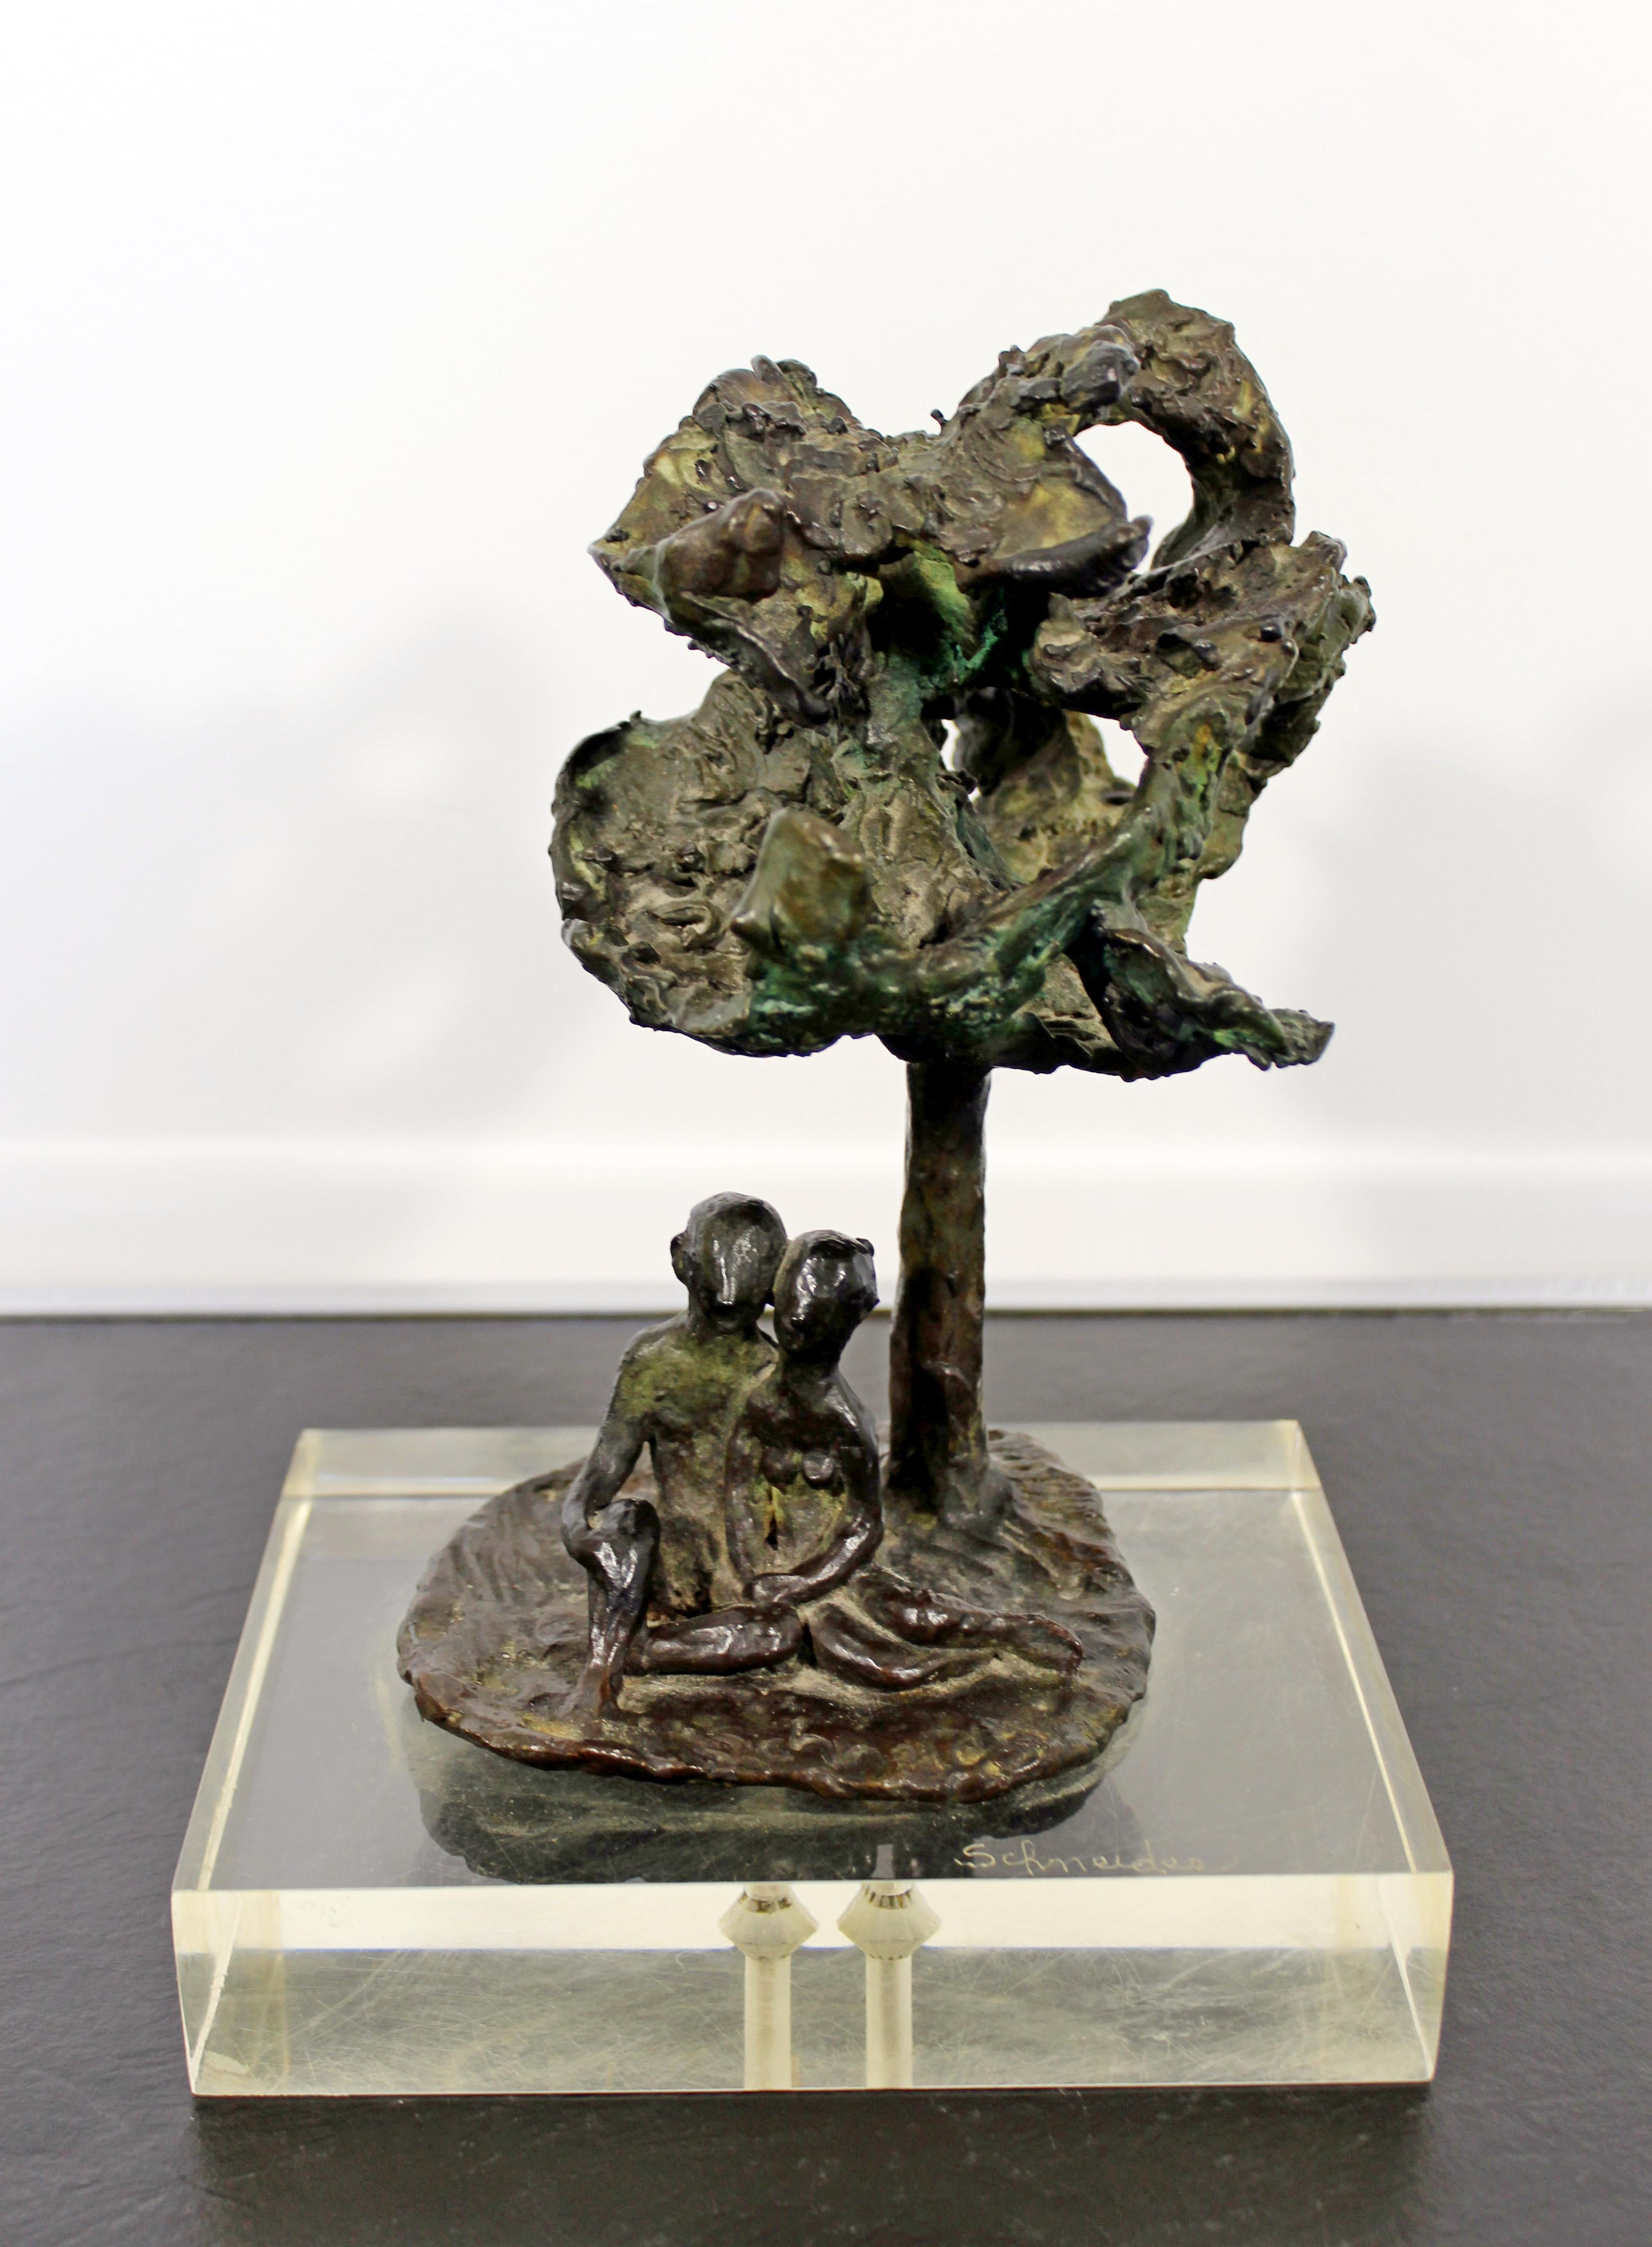 For your consideration is a marvelous art sculpture of figures under a tree, made of bronze on a Lucite base, signed by Arthur Schneider, circa the 1970s. In excellent condition. The dimensions are 7.5